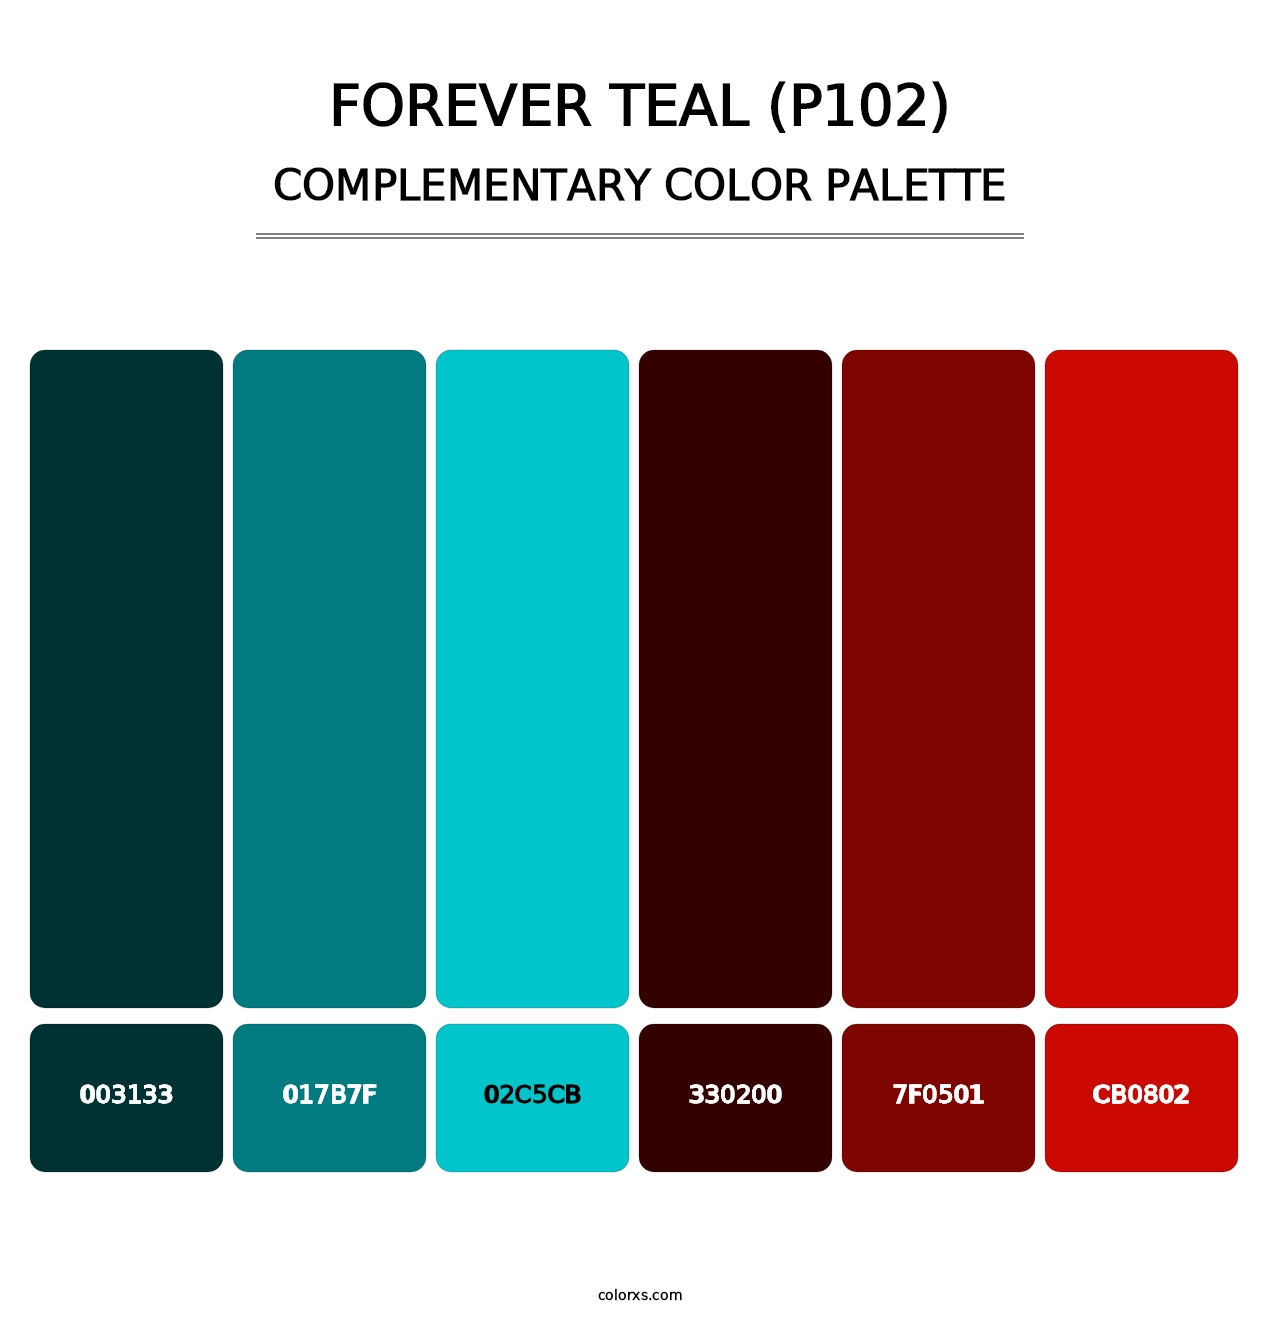 Forever Teal (P102) - Complementary Color Palette